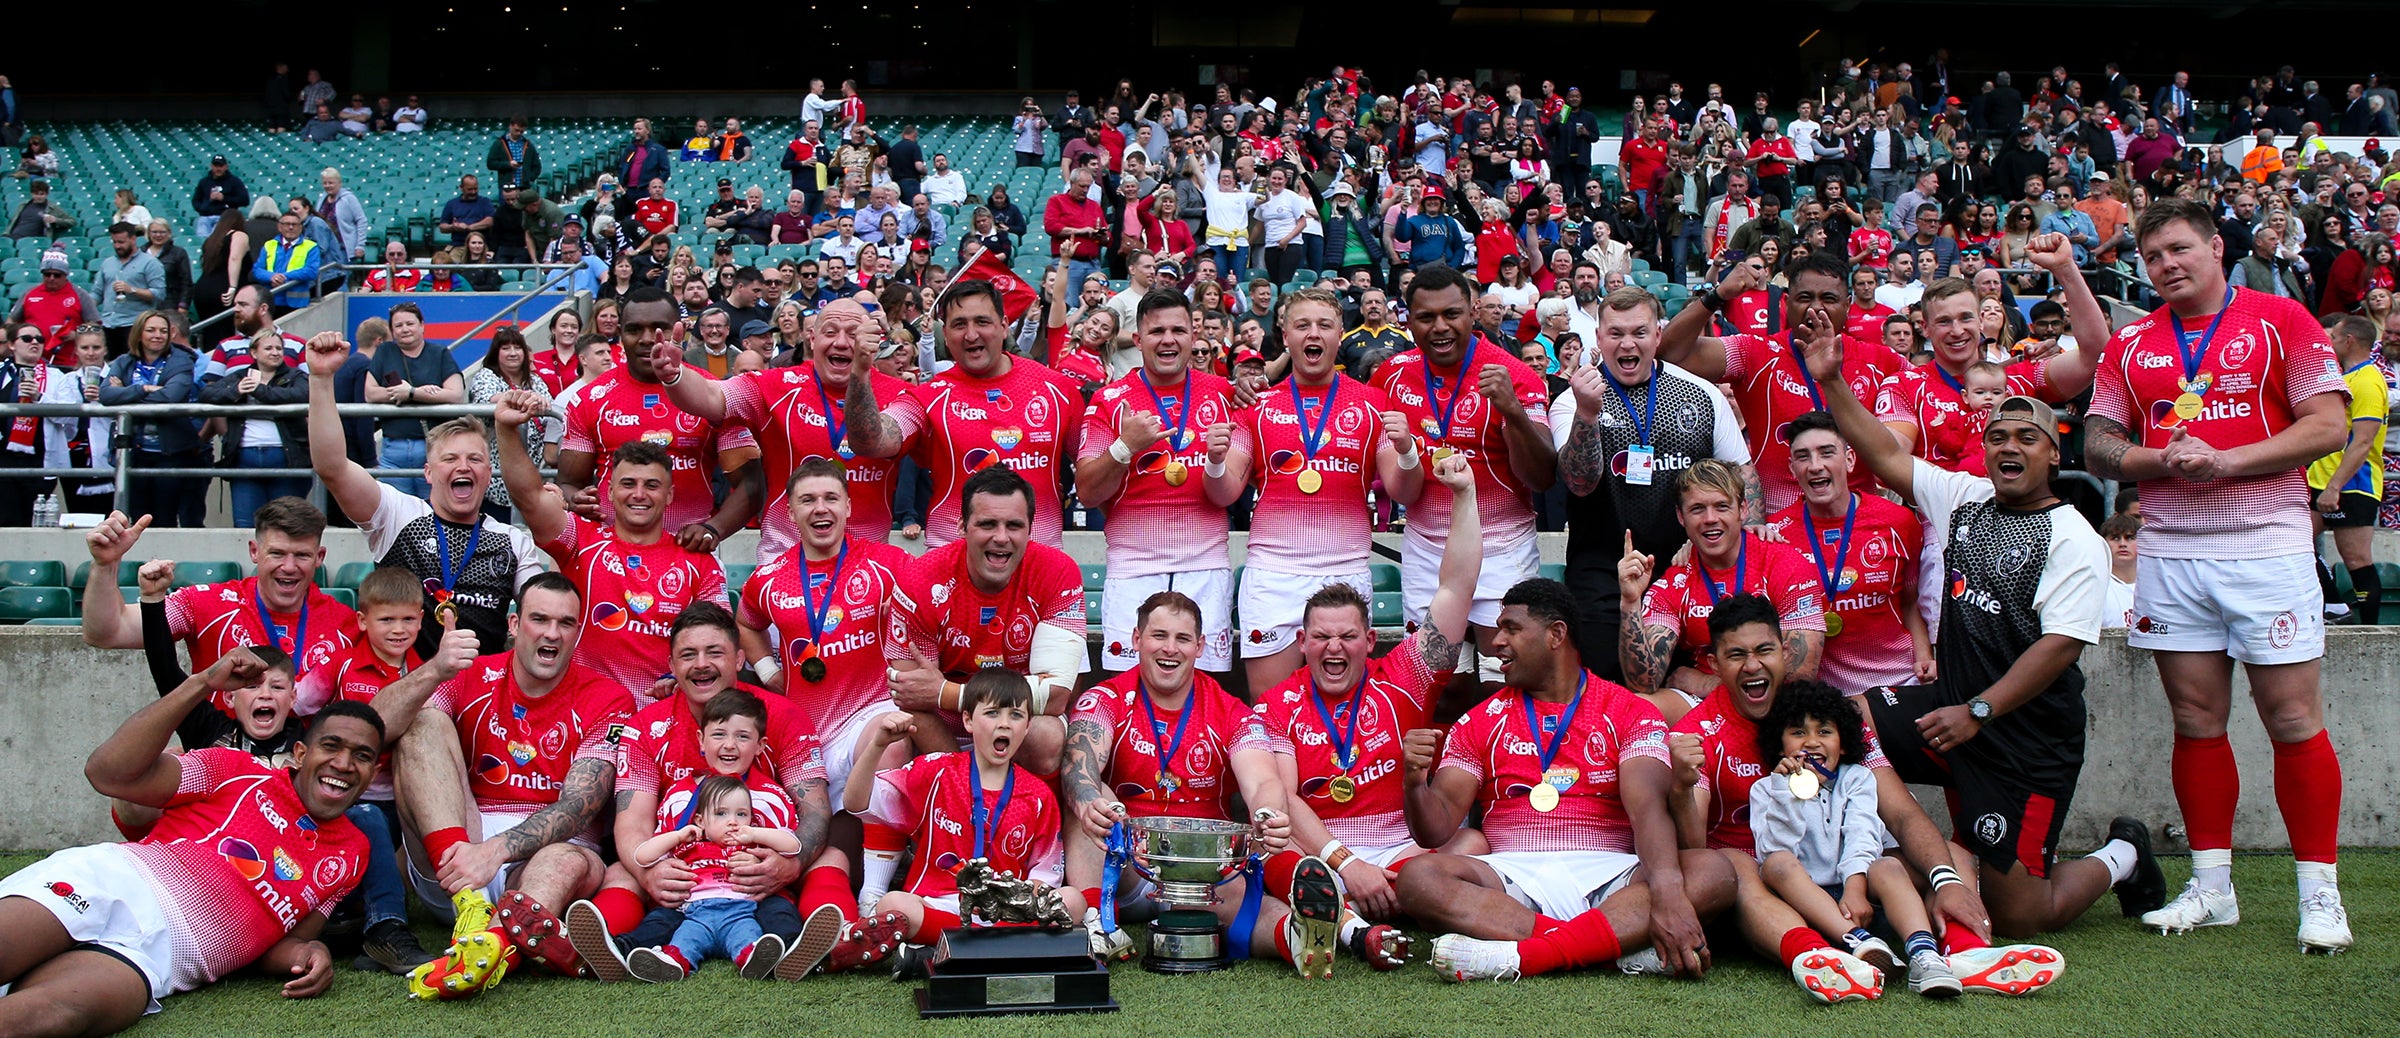 ARU WINS BABCOCK TROPHY AND INTER-SERVICES CHAMPIONSHIP TITLE